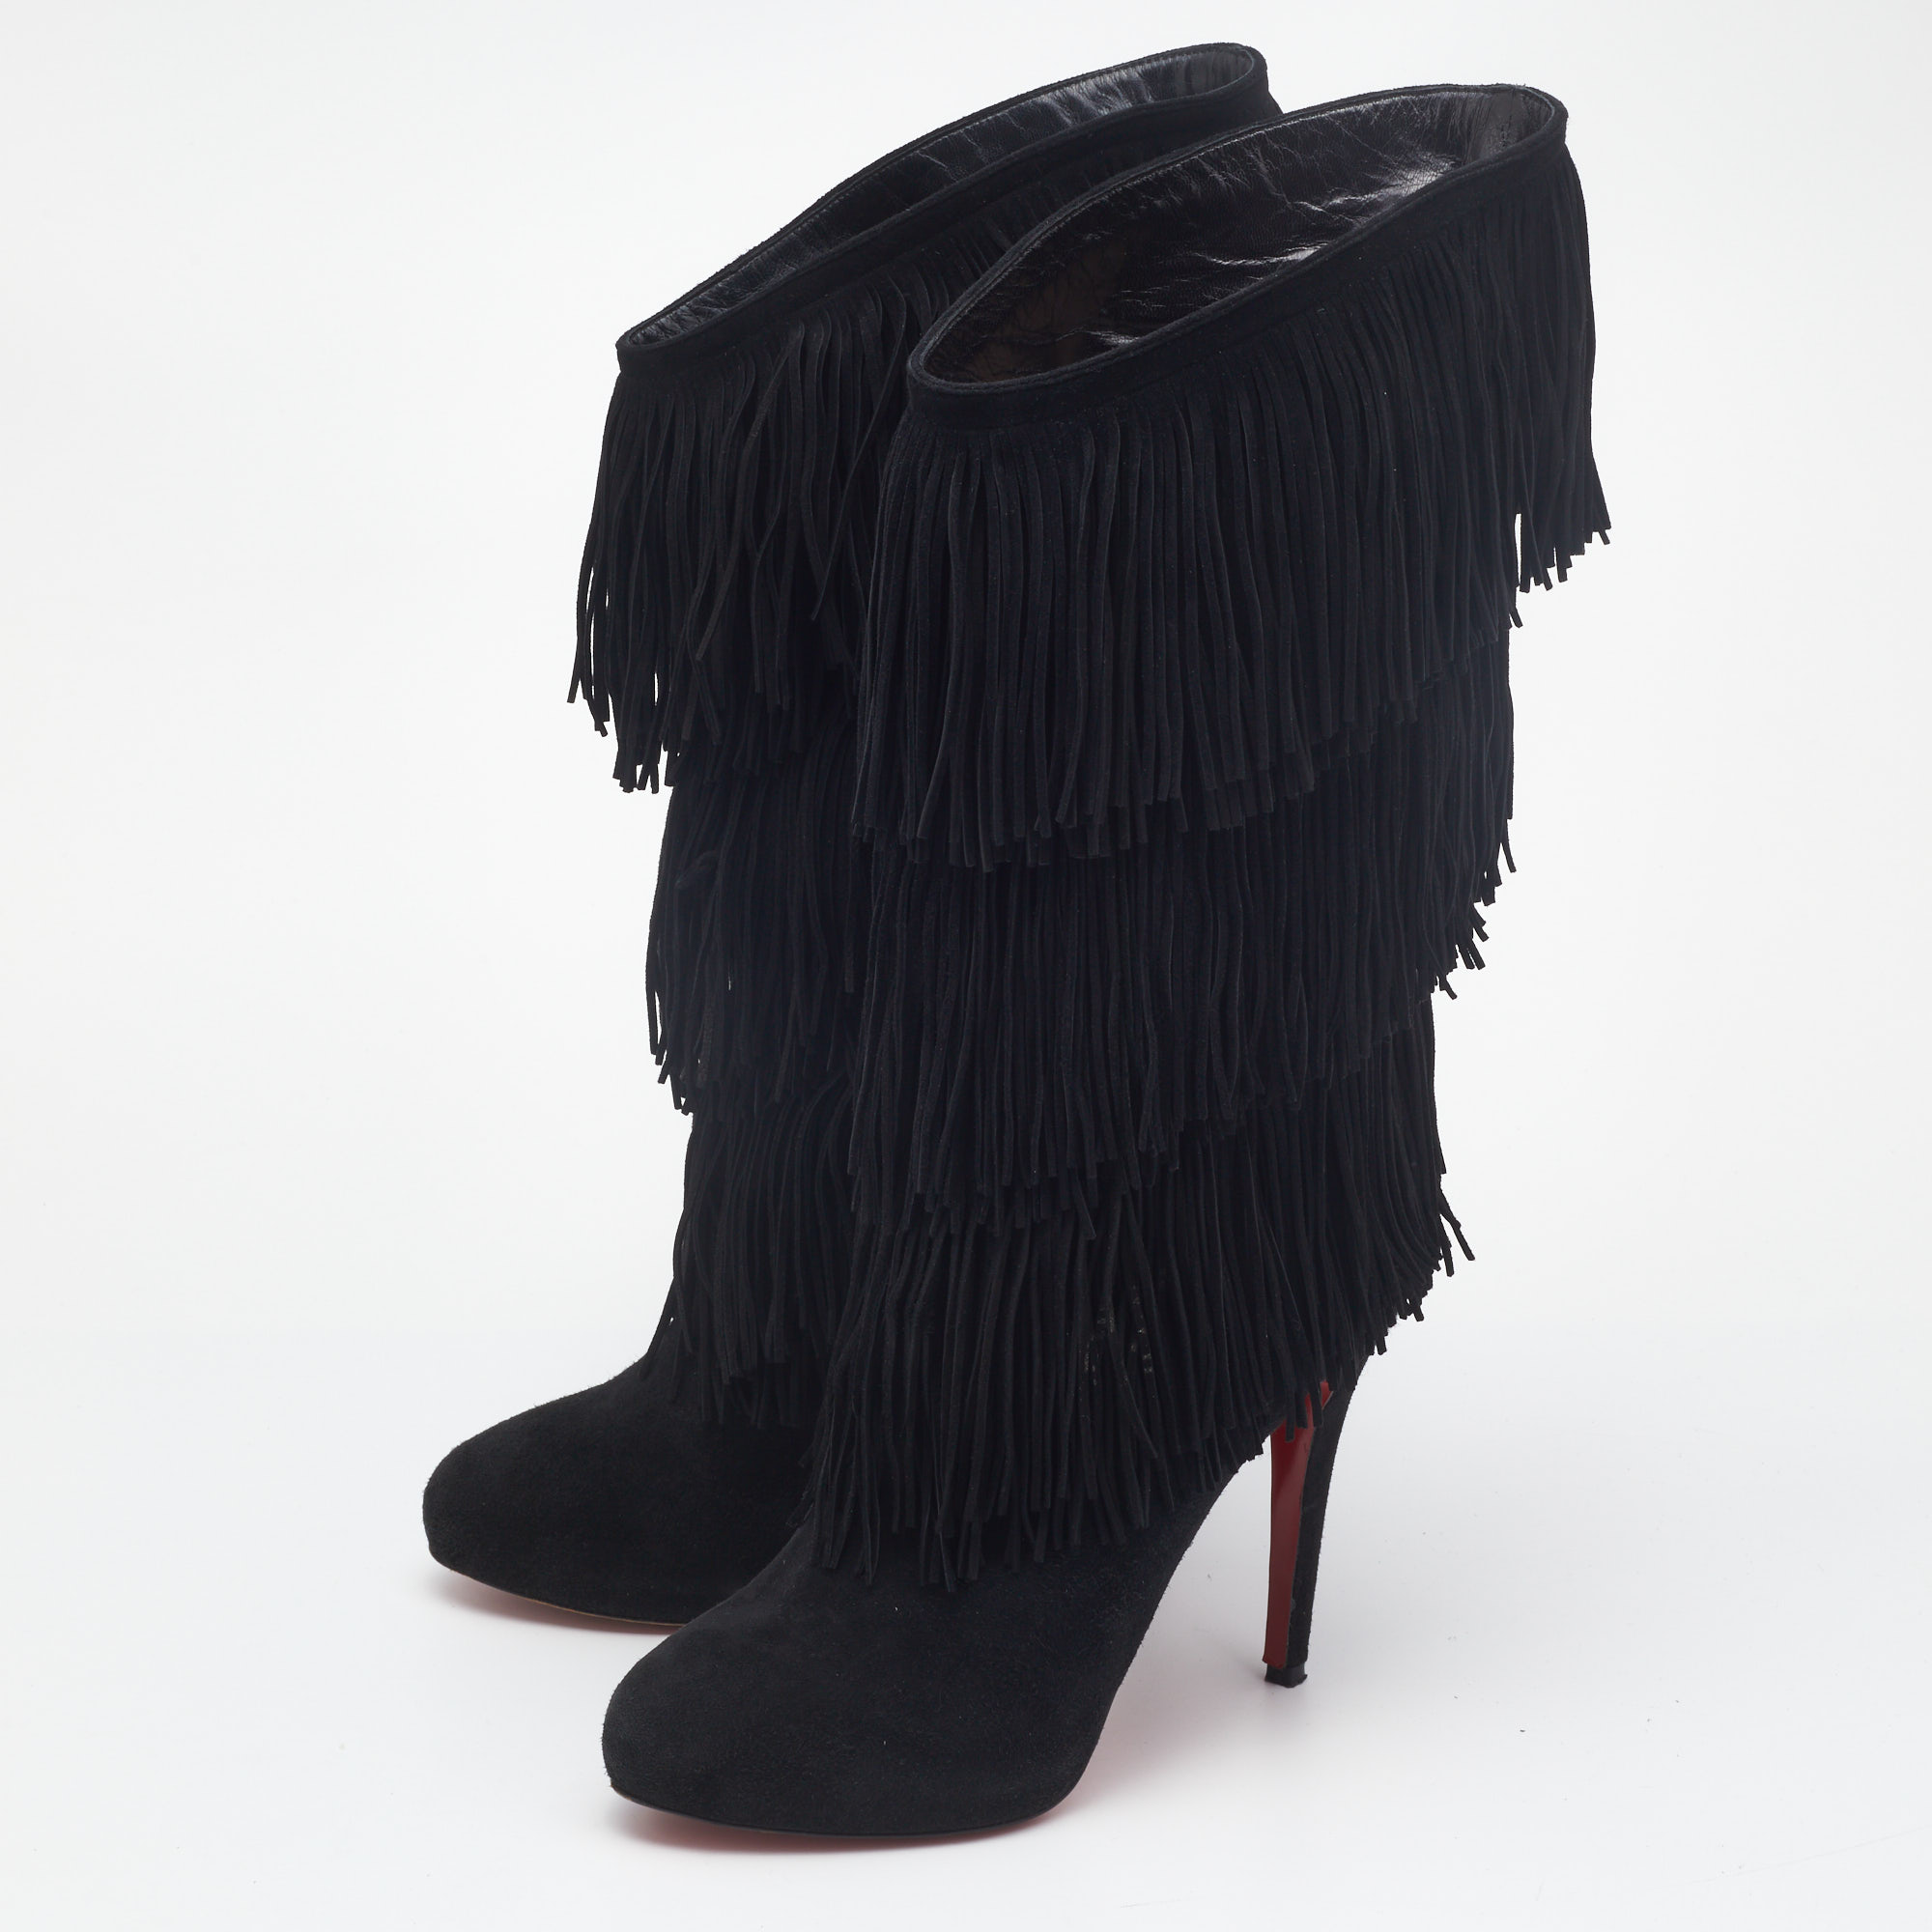 

Christian Louboutin Black Suede Fringe Calf Length Boots Size